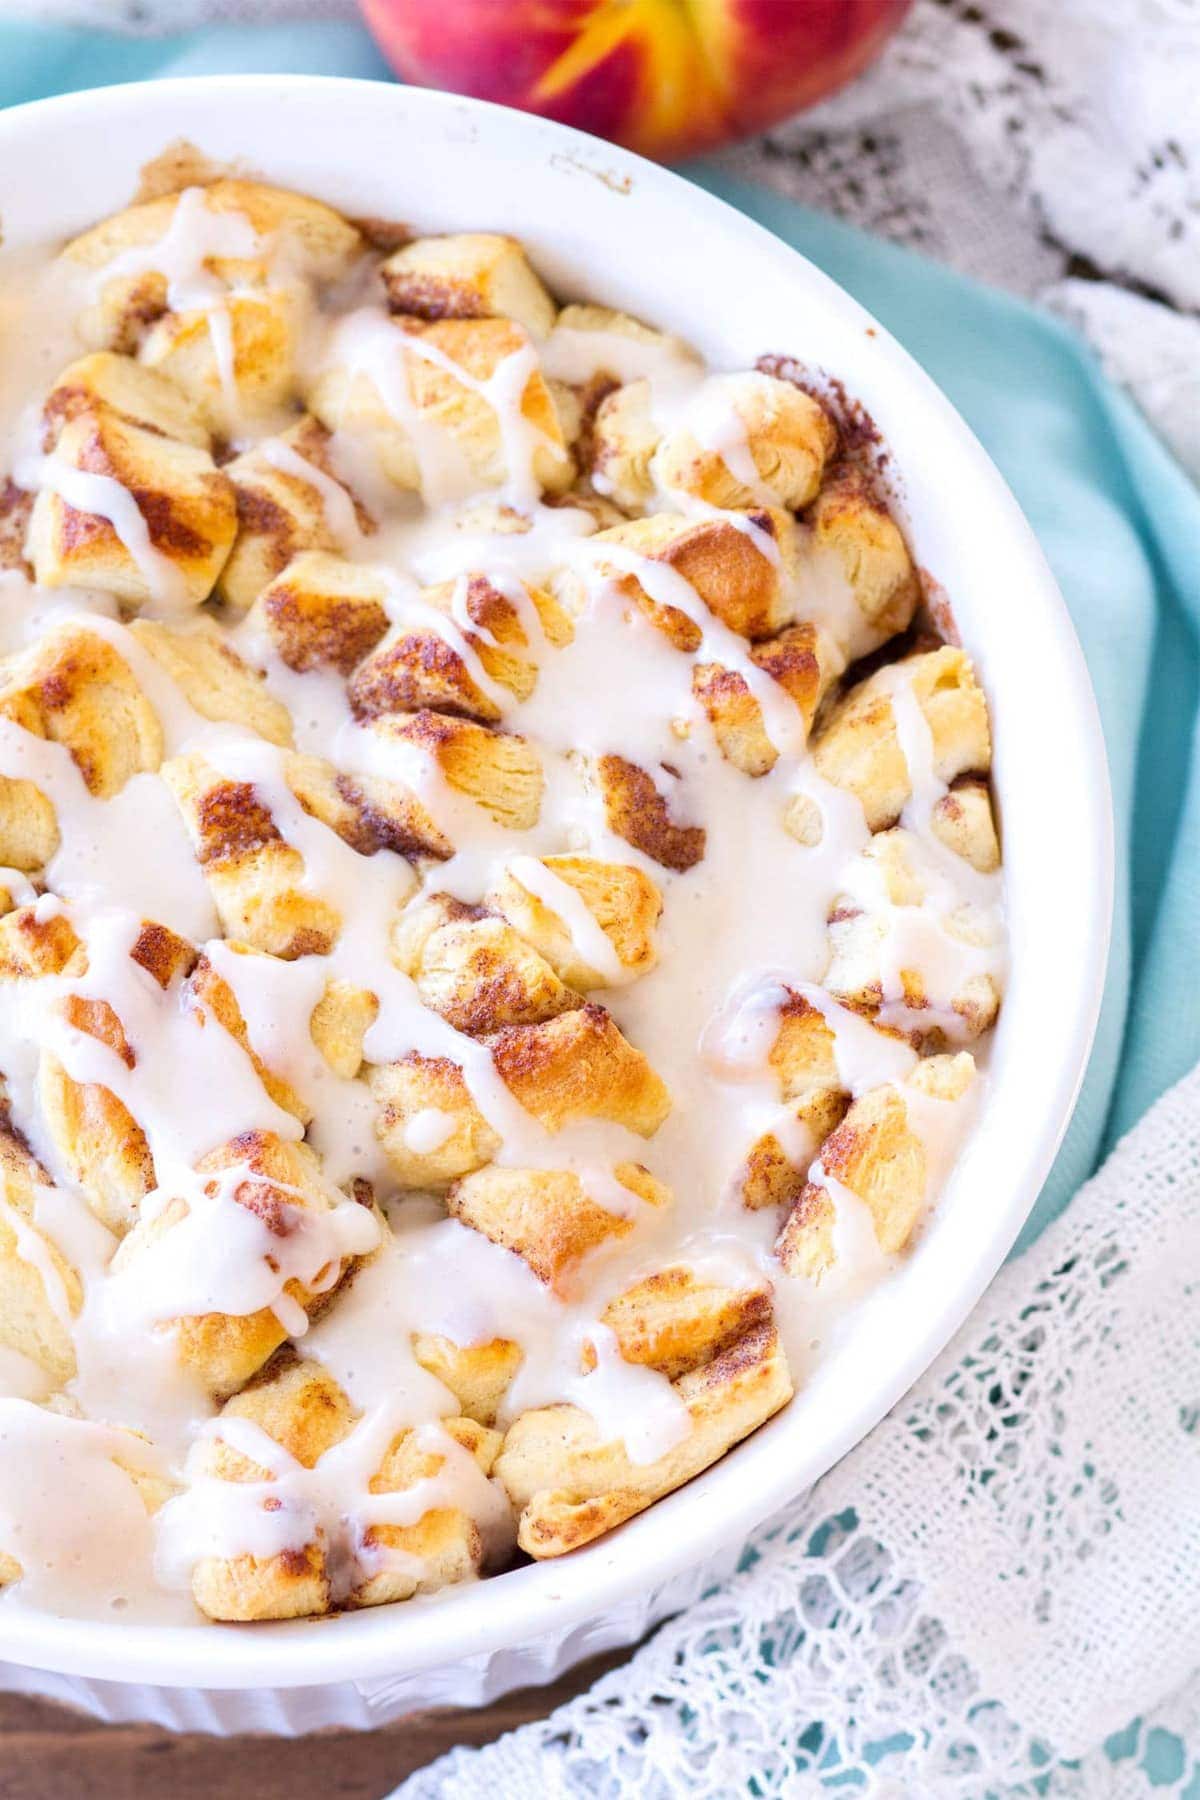 This Easy Cinnamon Roll Peach Cobbler is made with fresh peaches, sweet spices, and pre-made cinnamon roll dough. The final component of this cinnamon roll peach cobbler recipe is a sweet vanilla glaze, making this a quick and easy summer dessert! 